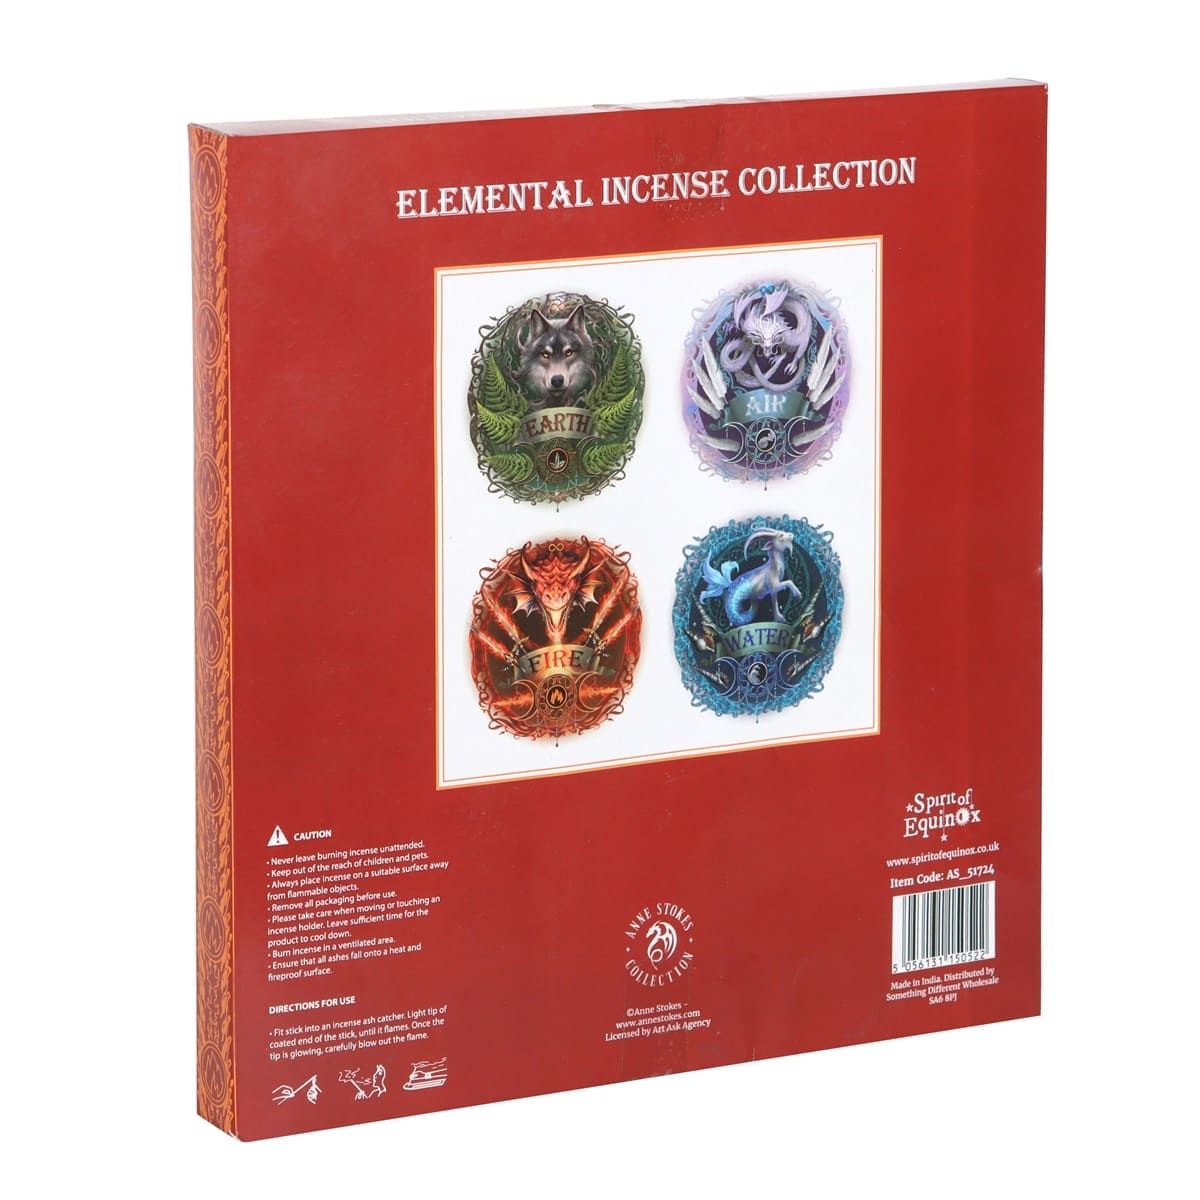 Elemental Magic Incense Stick Collection by Anne Stokes - Incense Sticks by Anne Stokes